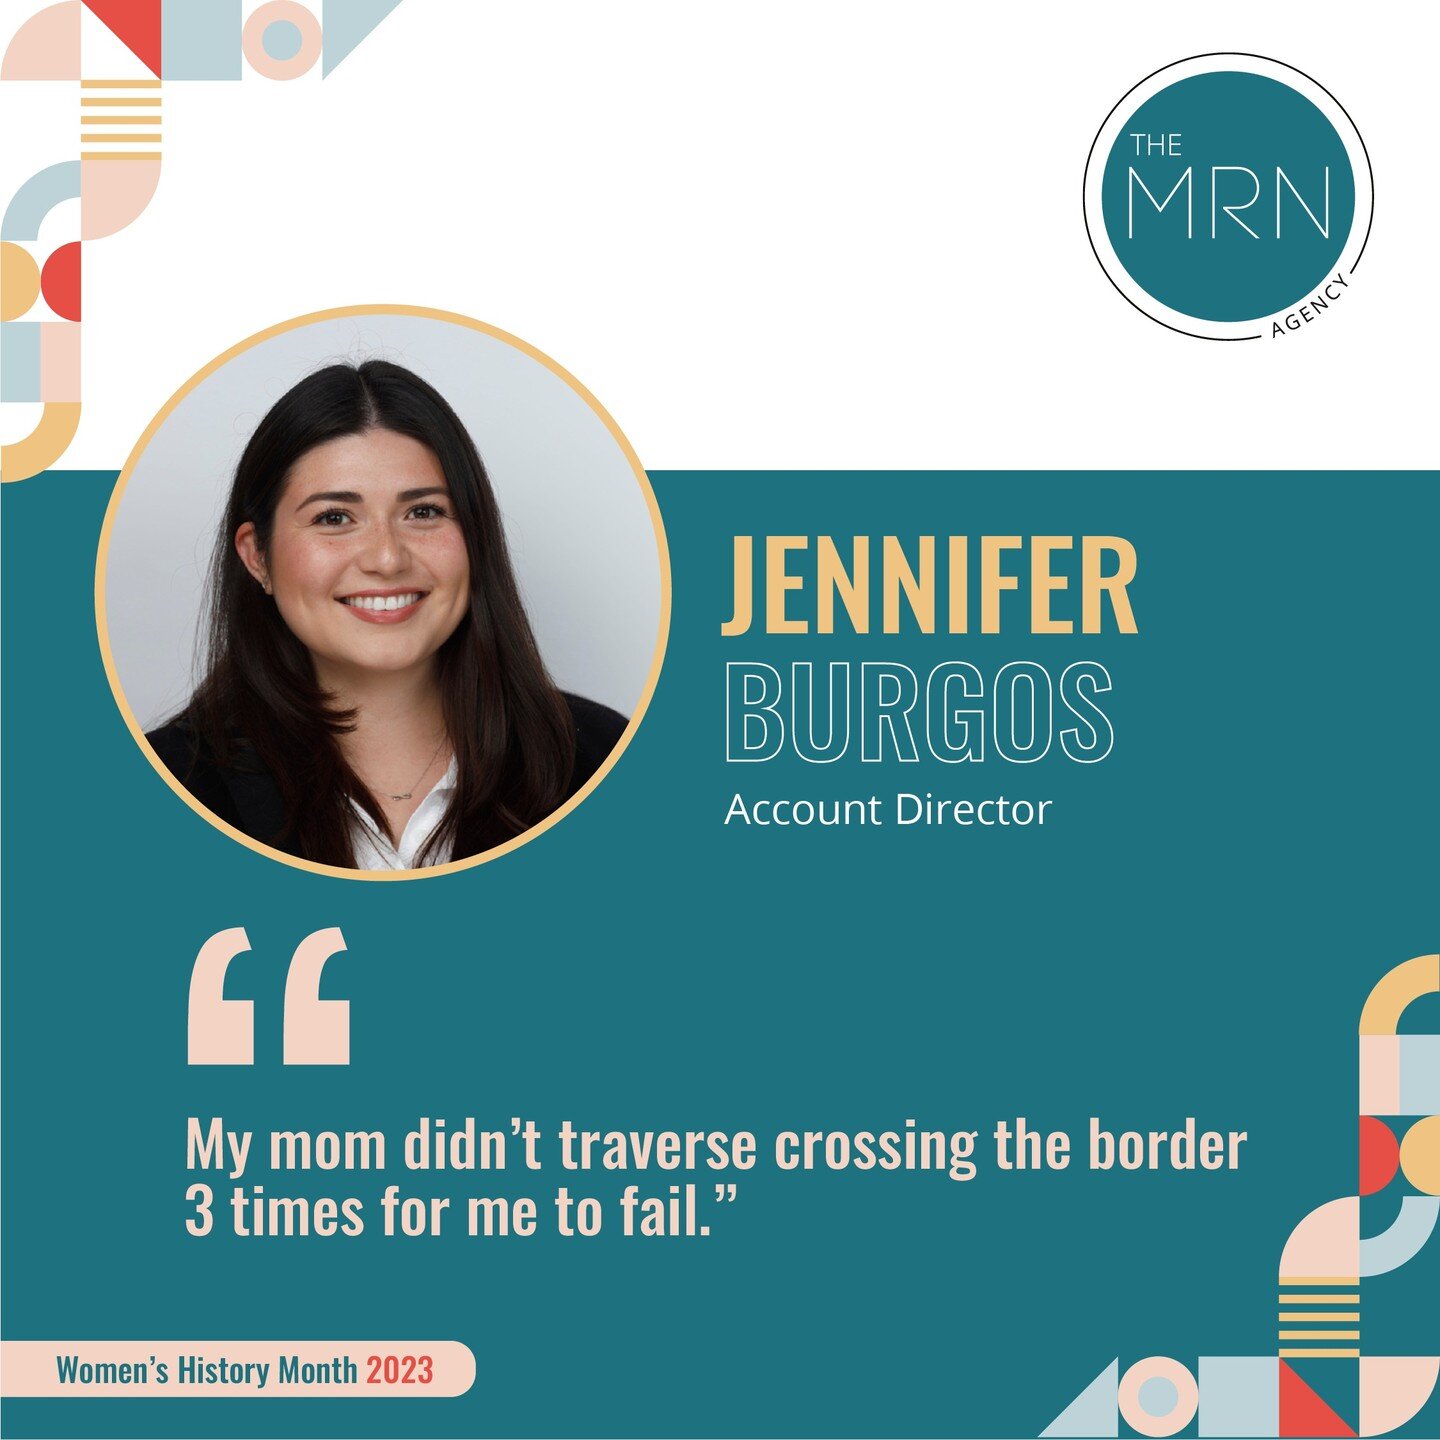 MRN is celebrating Women&rsquo;s History Month by highlighting the women who&rsquo;ve inspired our team!

Jennifer Burgos, our Account Director, is inspired by&nbsp;her mom.

&ldquo;Mi mam&aacute; is the definition of perseverance, she crossed the bo